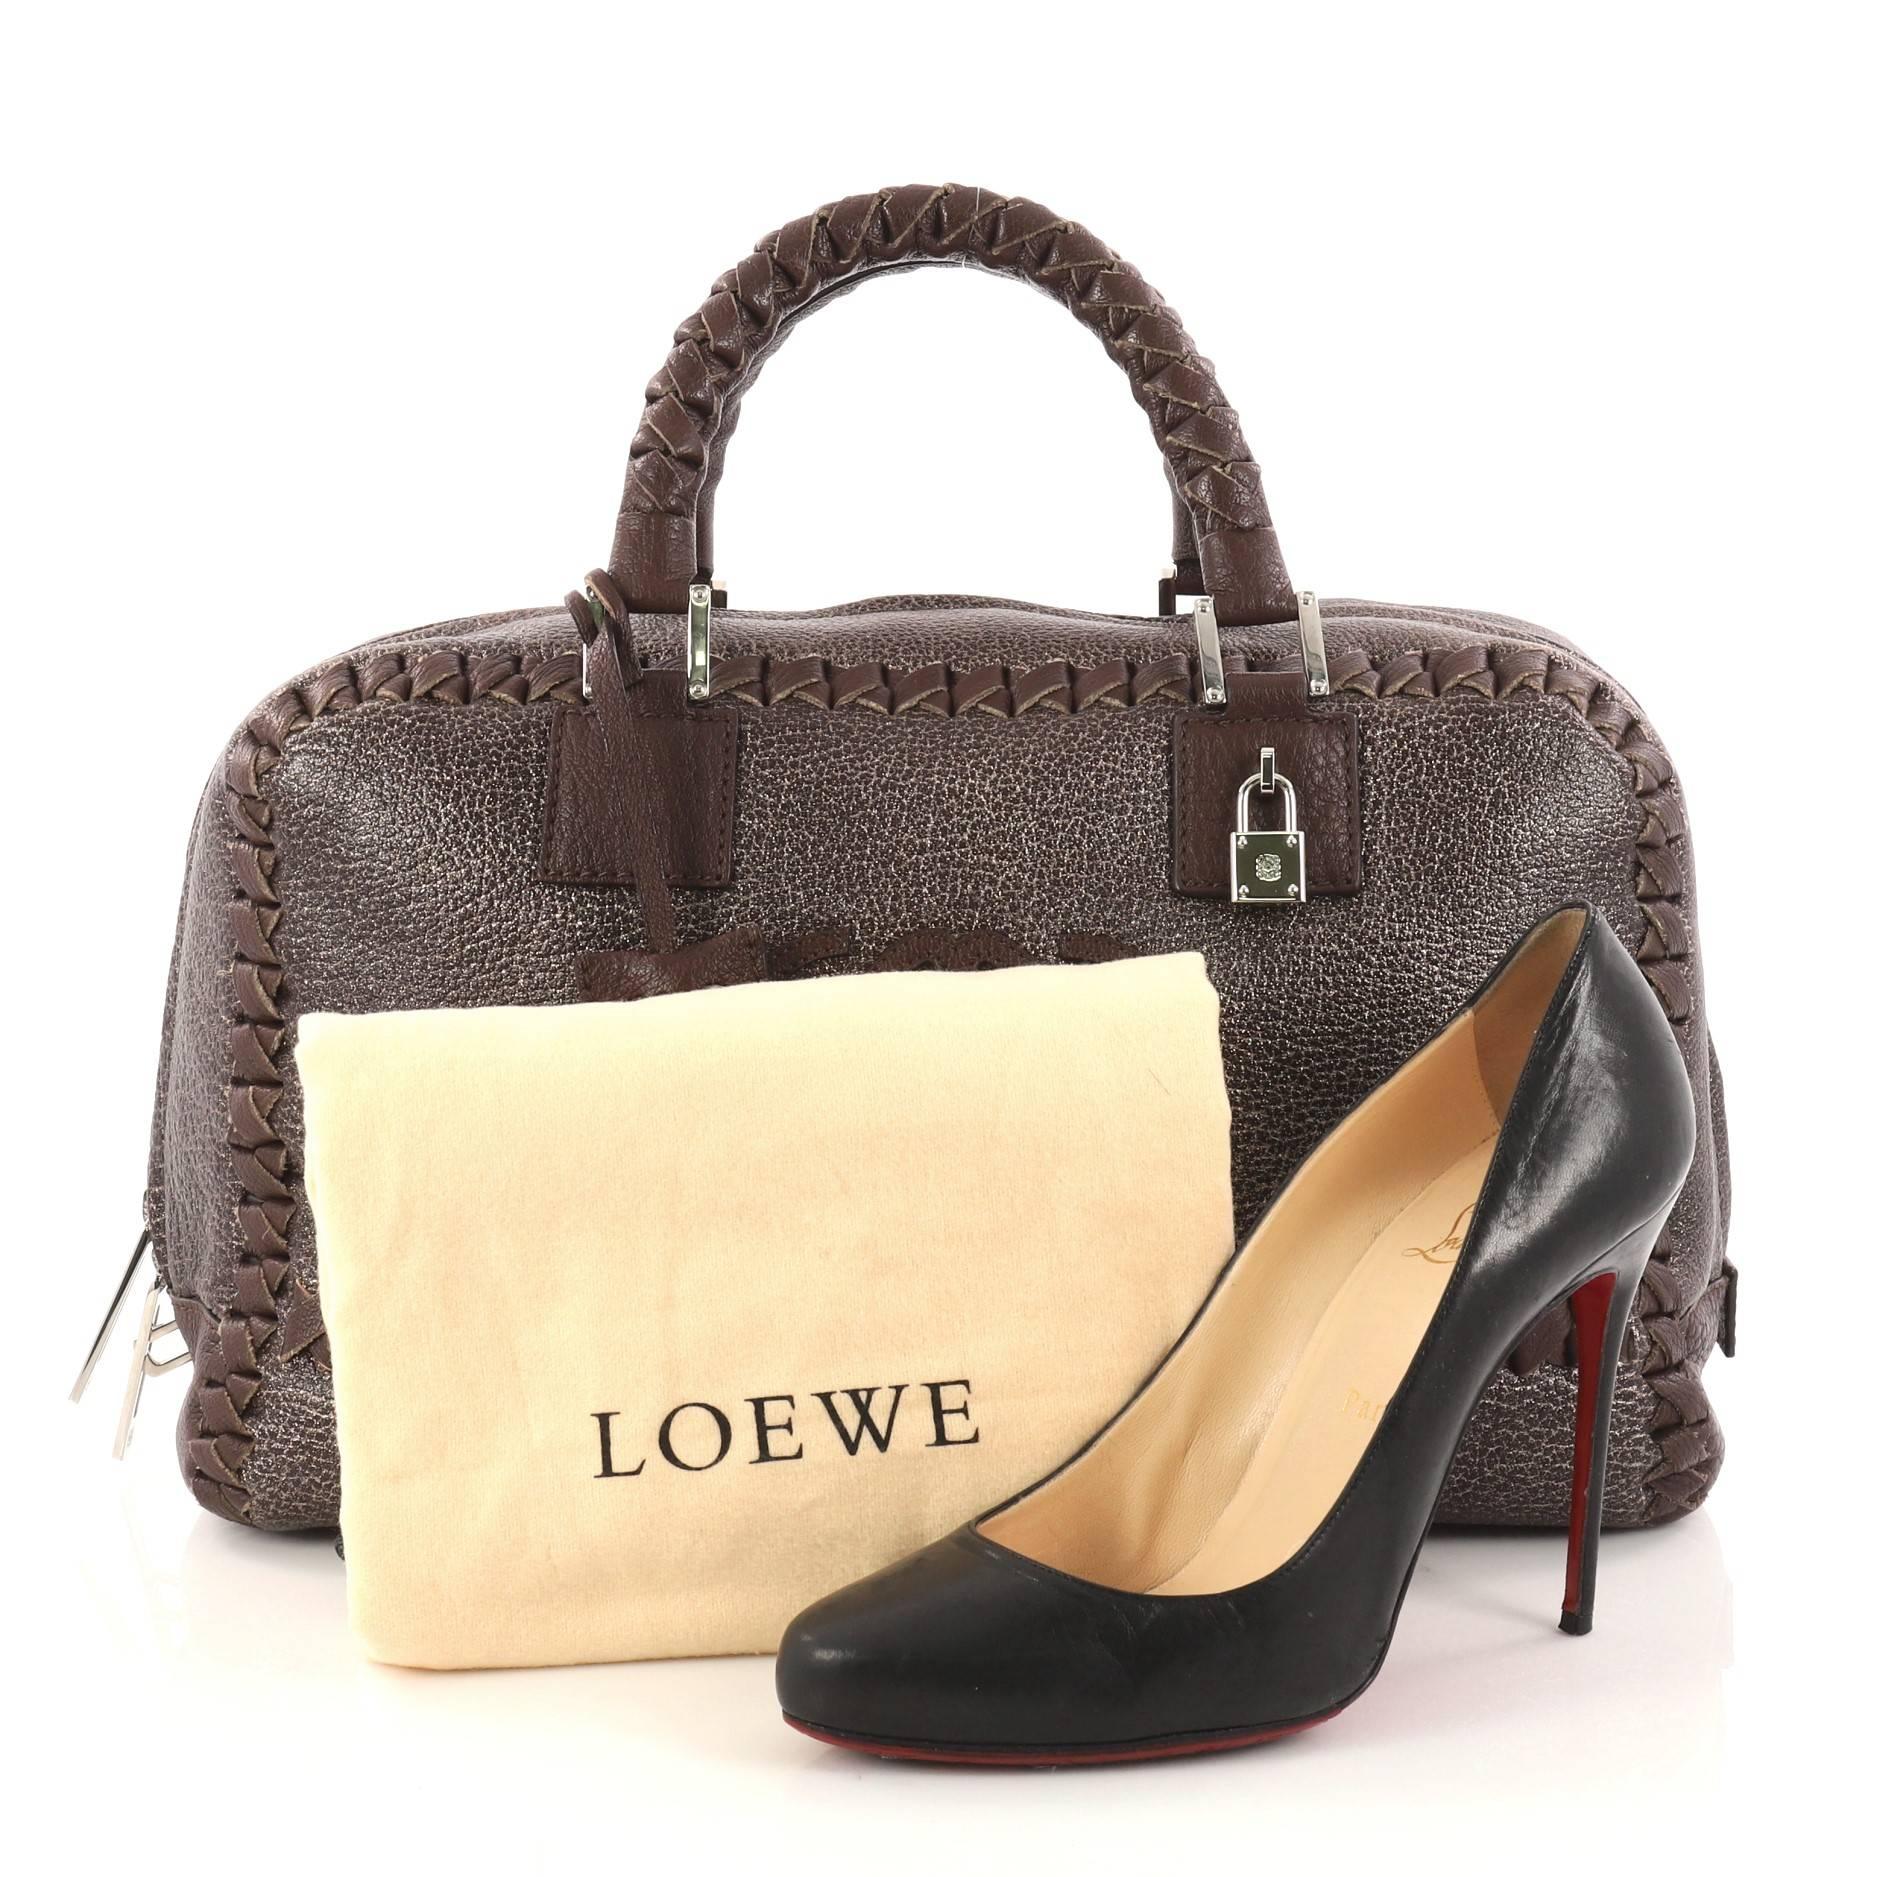 This authentic Loewe Amazona Bag Whipstitch Leather 36 is a perfect minimalist handbag for on-the-go fashionista. Crafted in dark brown leather, this bag features dual-braided leather handles, whipstitched leather trims, stitched logo at front,